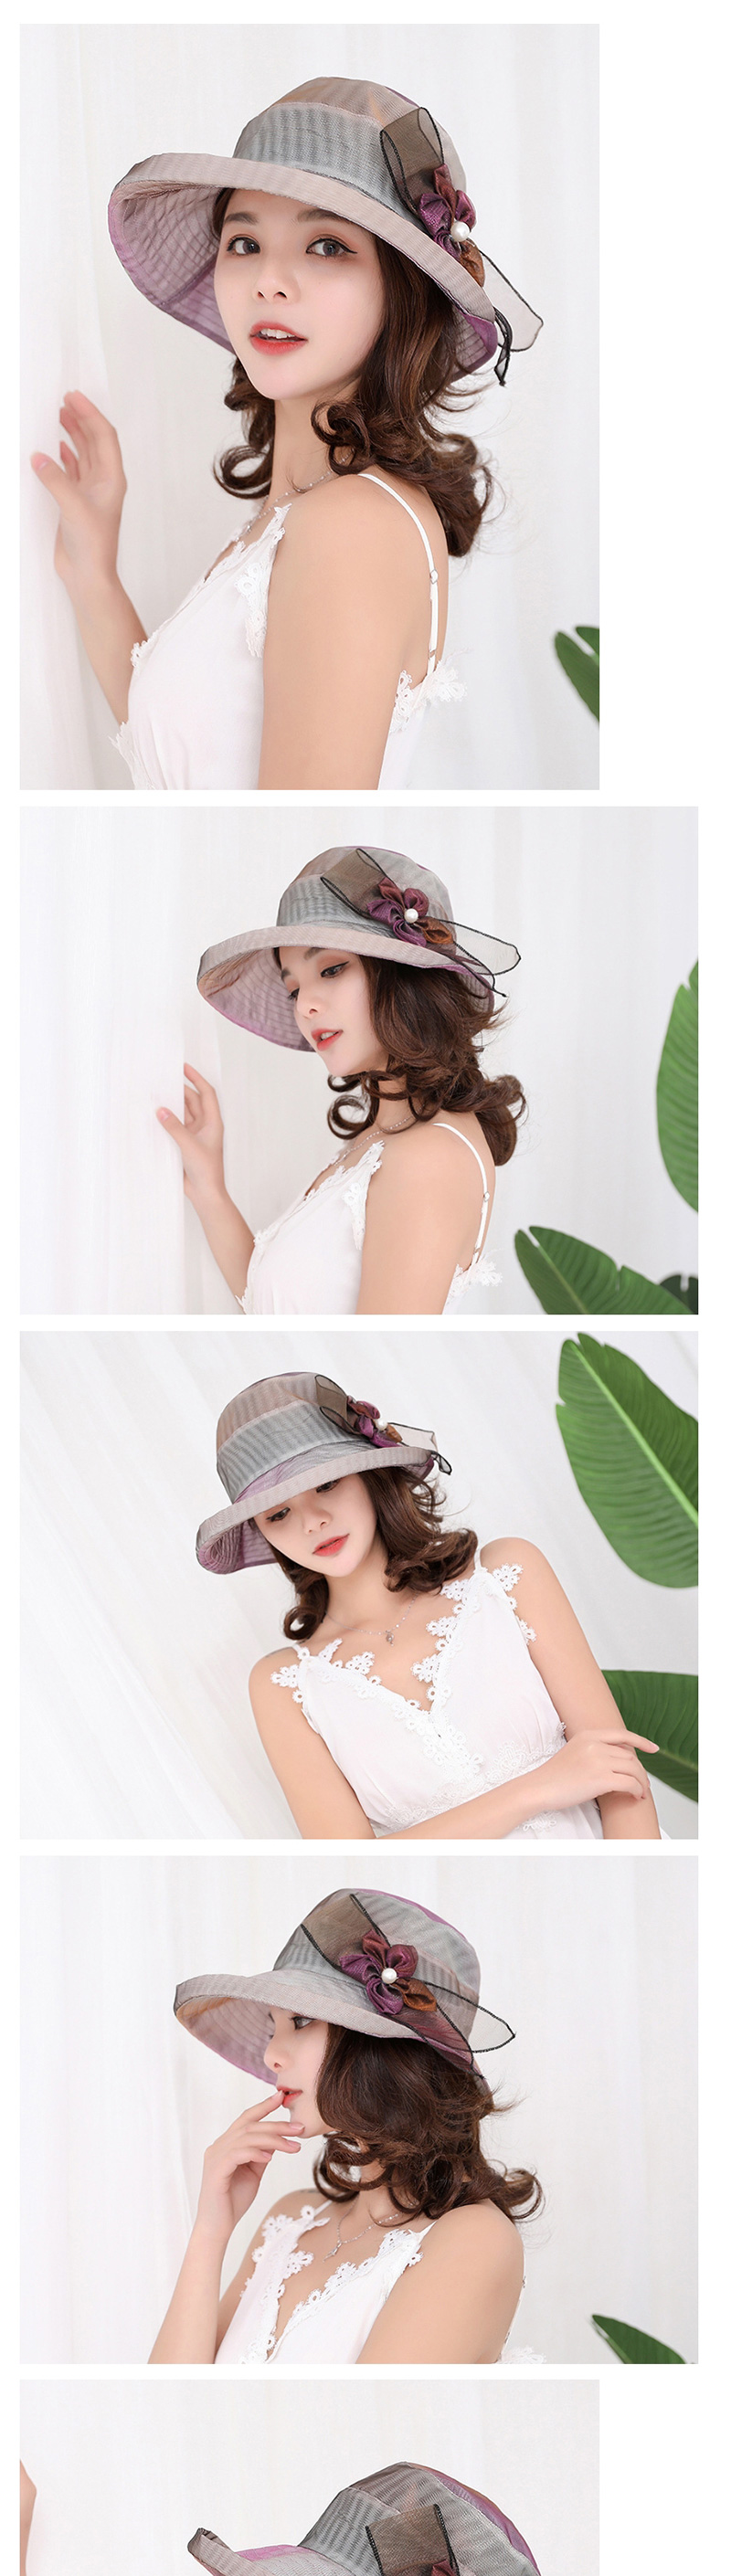 Fashion 9540 Violet Bow-knit Pearl Mesh Contrast Hat,Sun Hats